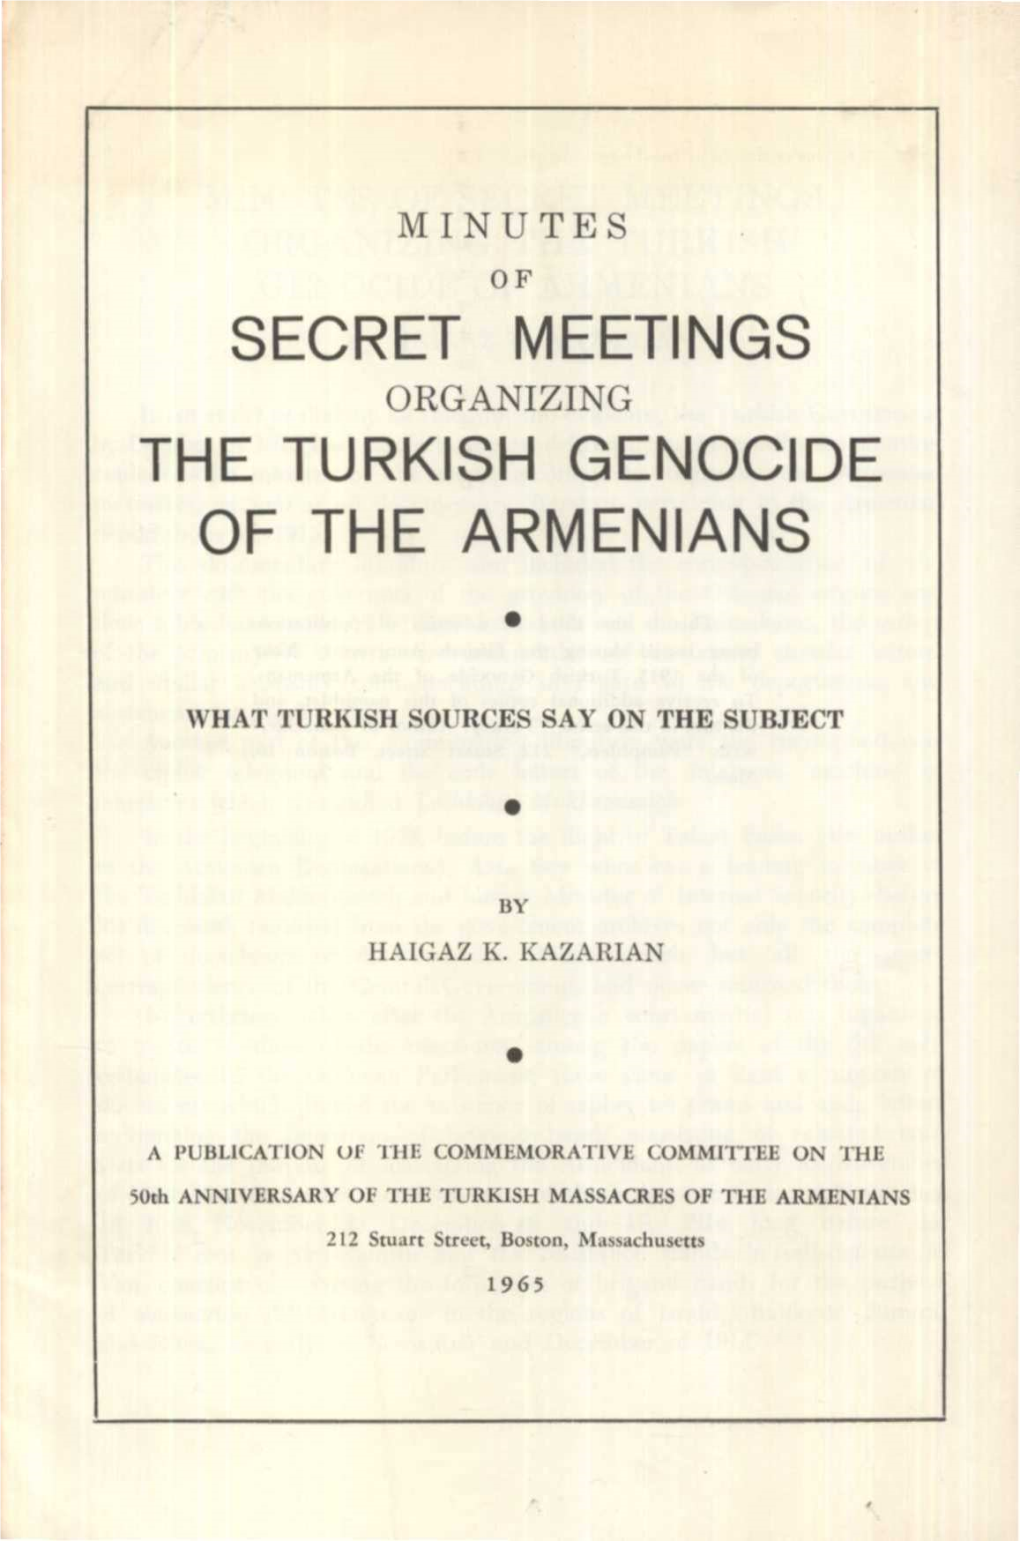 Secret Meetings the Turkish Genocide of the Armenians